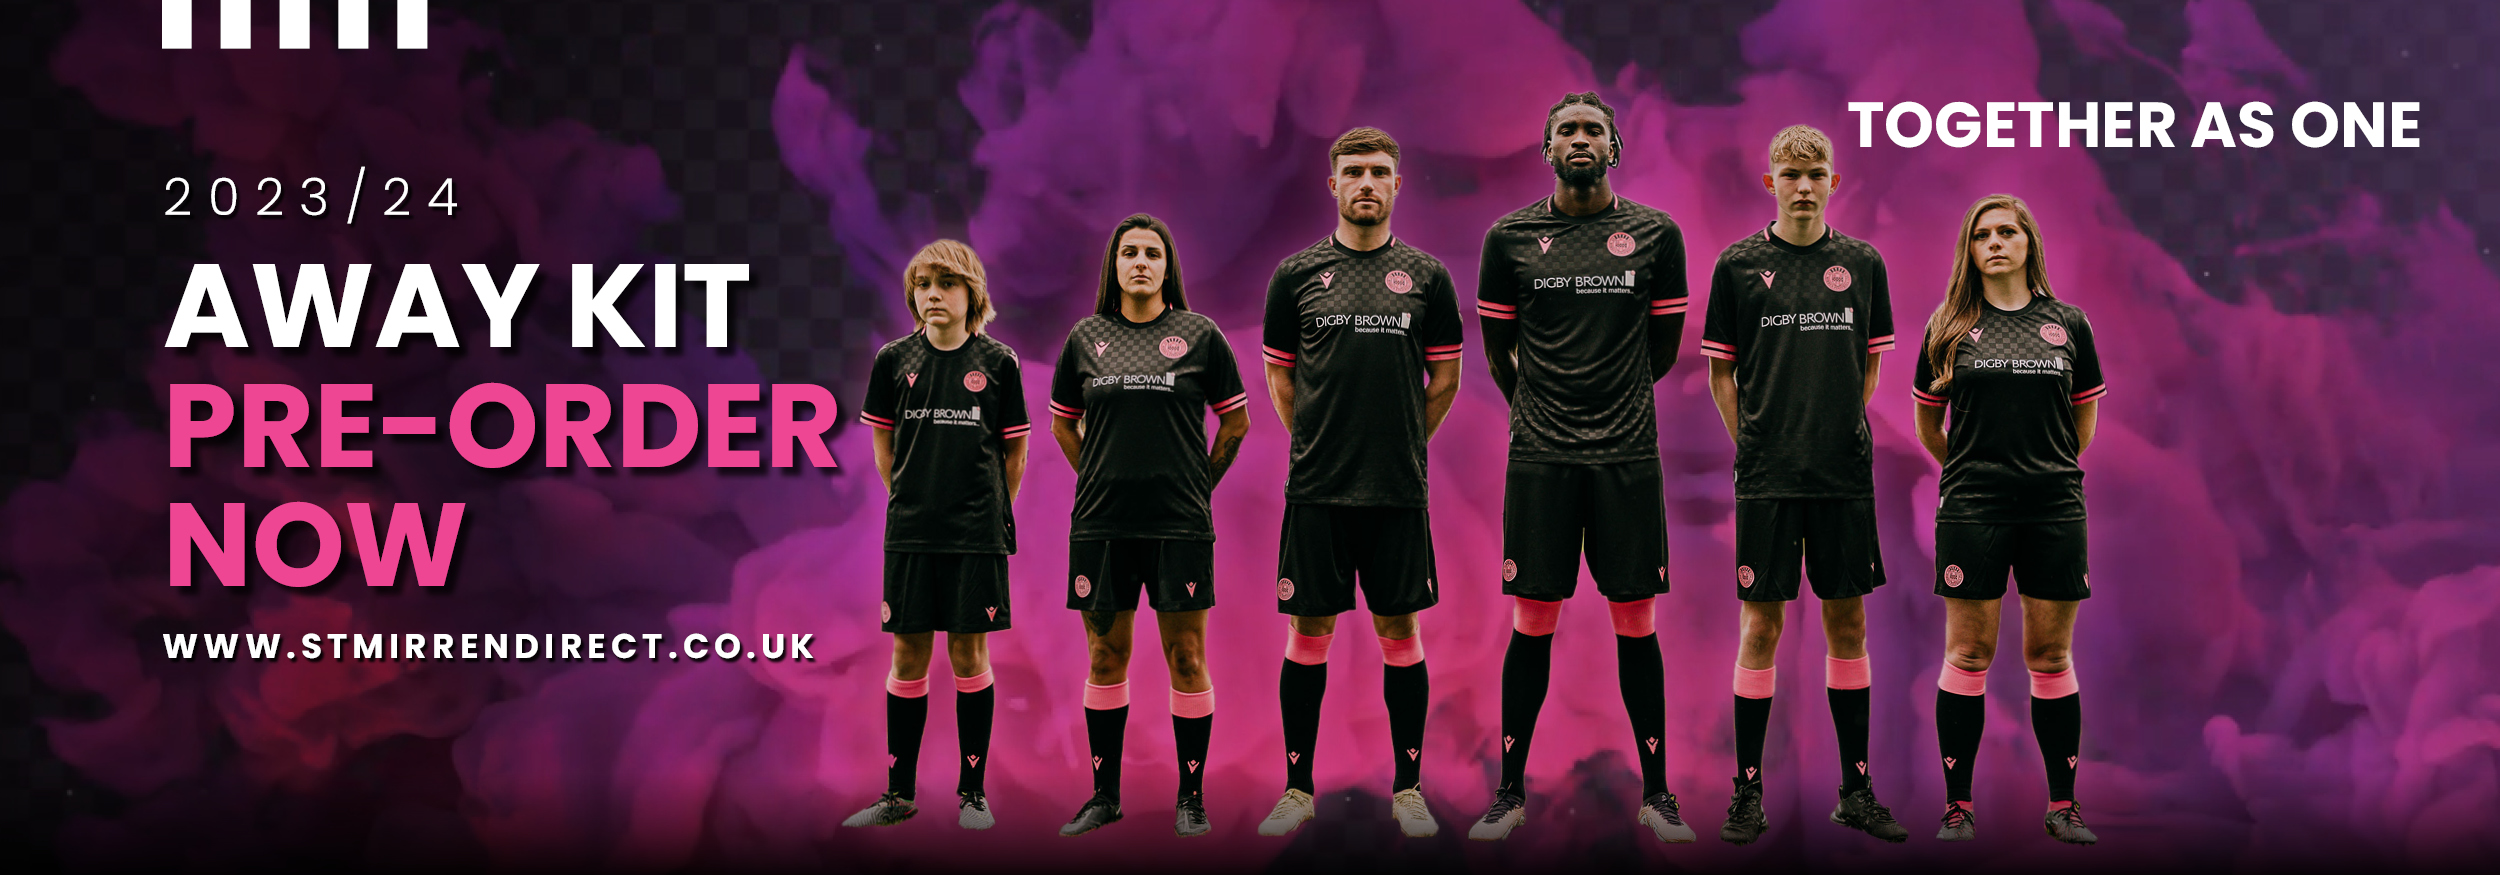 Introducing our #TogetherAsOne 2023/24 away kit